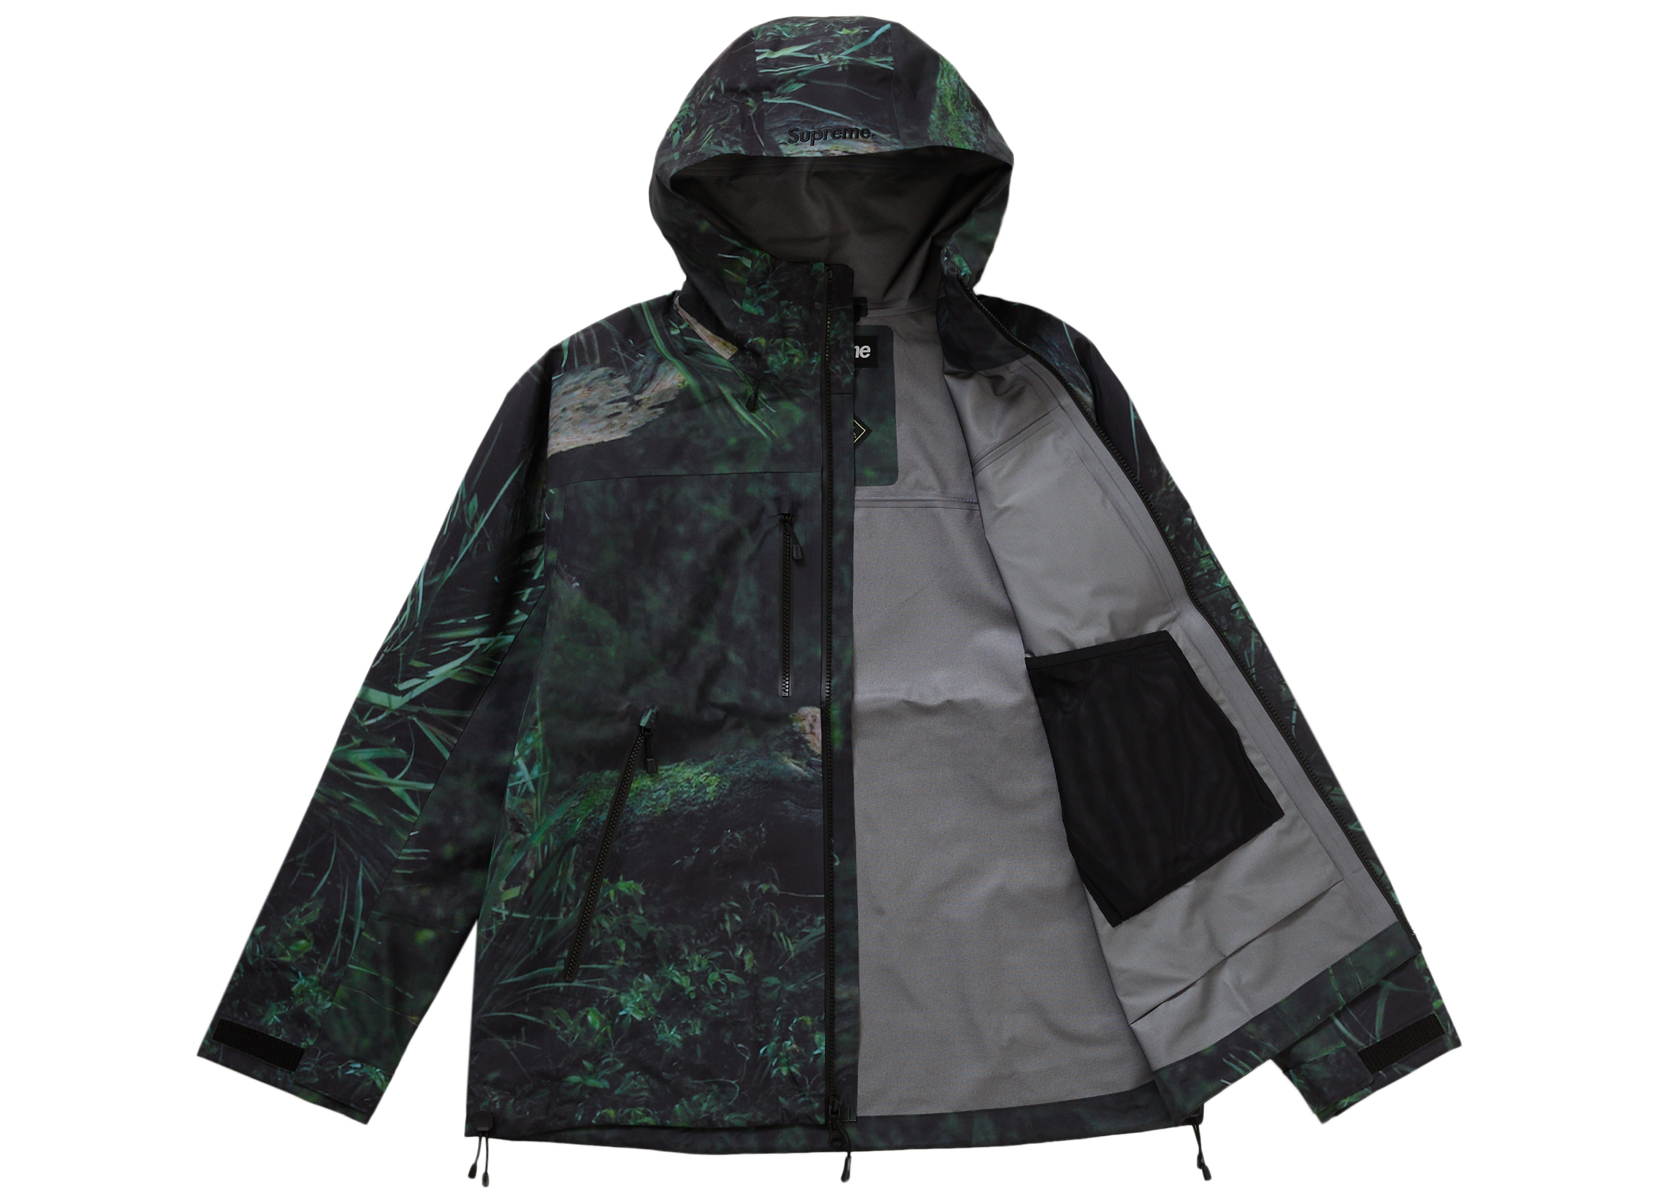 Supreme GORE-TEX Taped Seam Shell Jacket Kermit The Frog